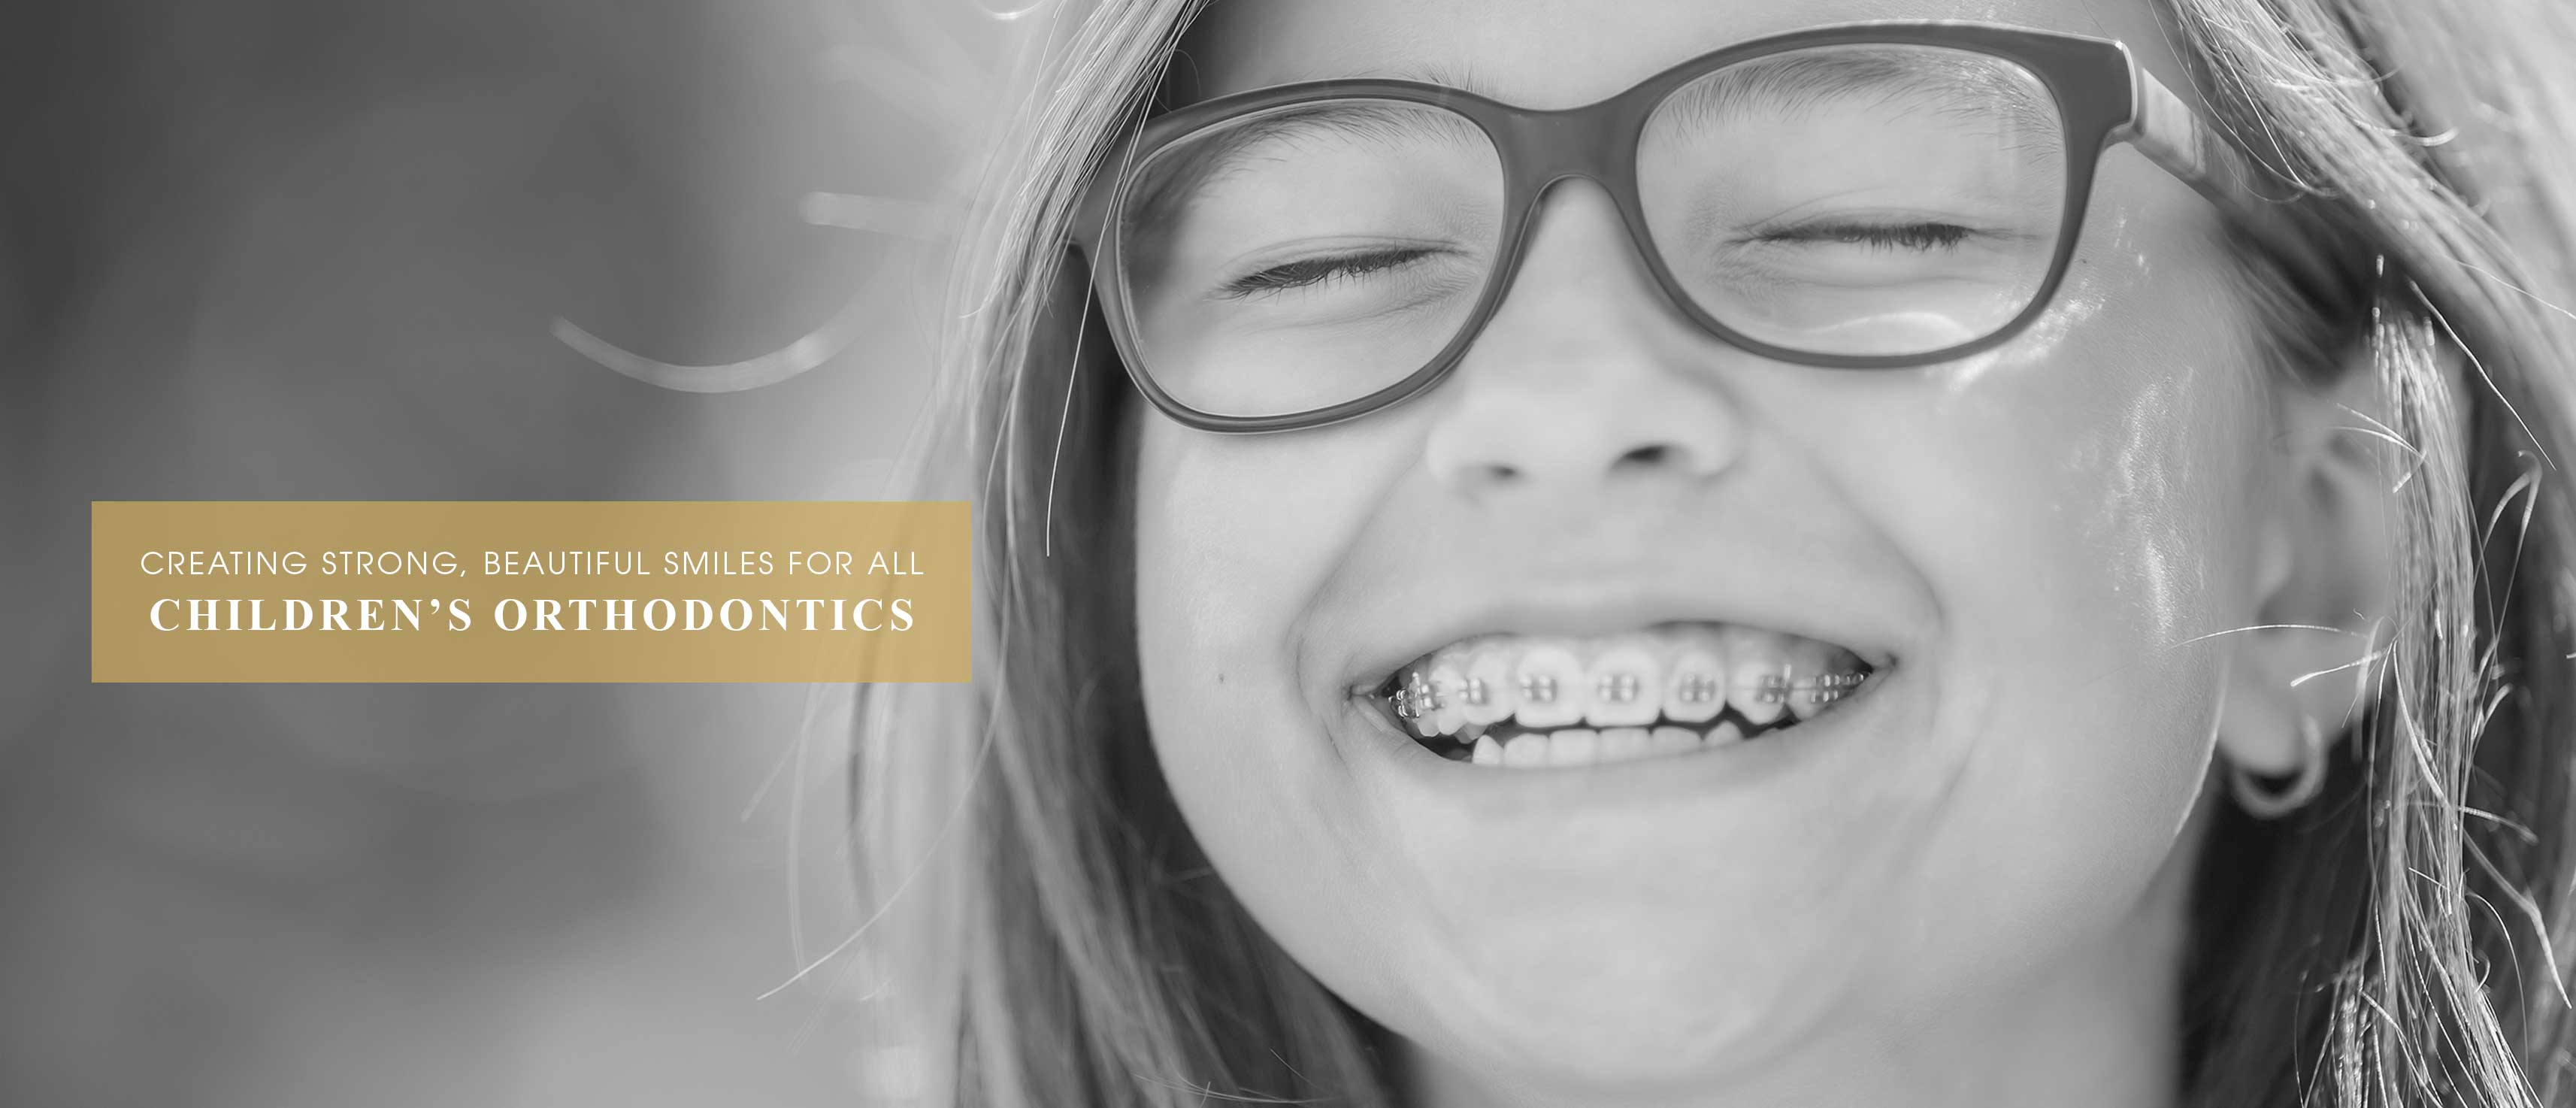 Creating strong, beautiful smiles for all. Children's Orthodontics.